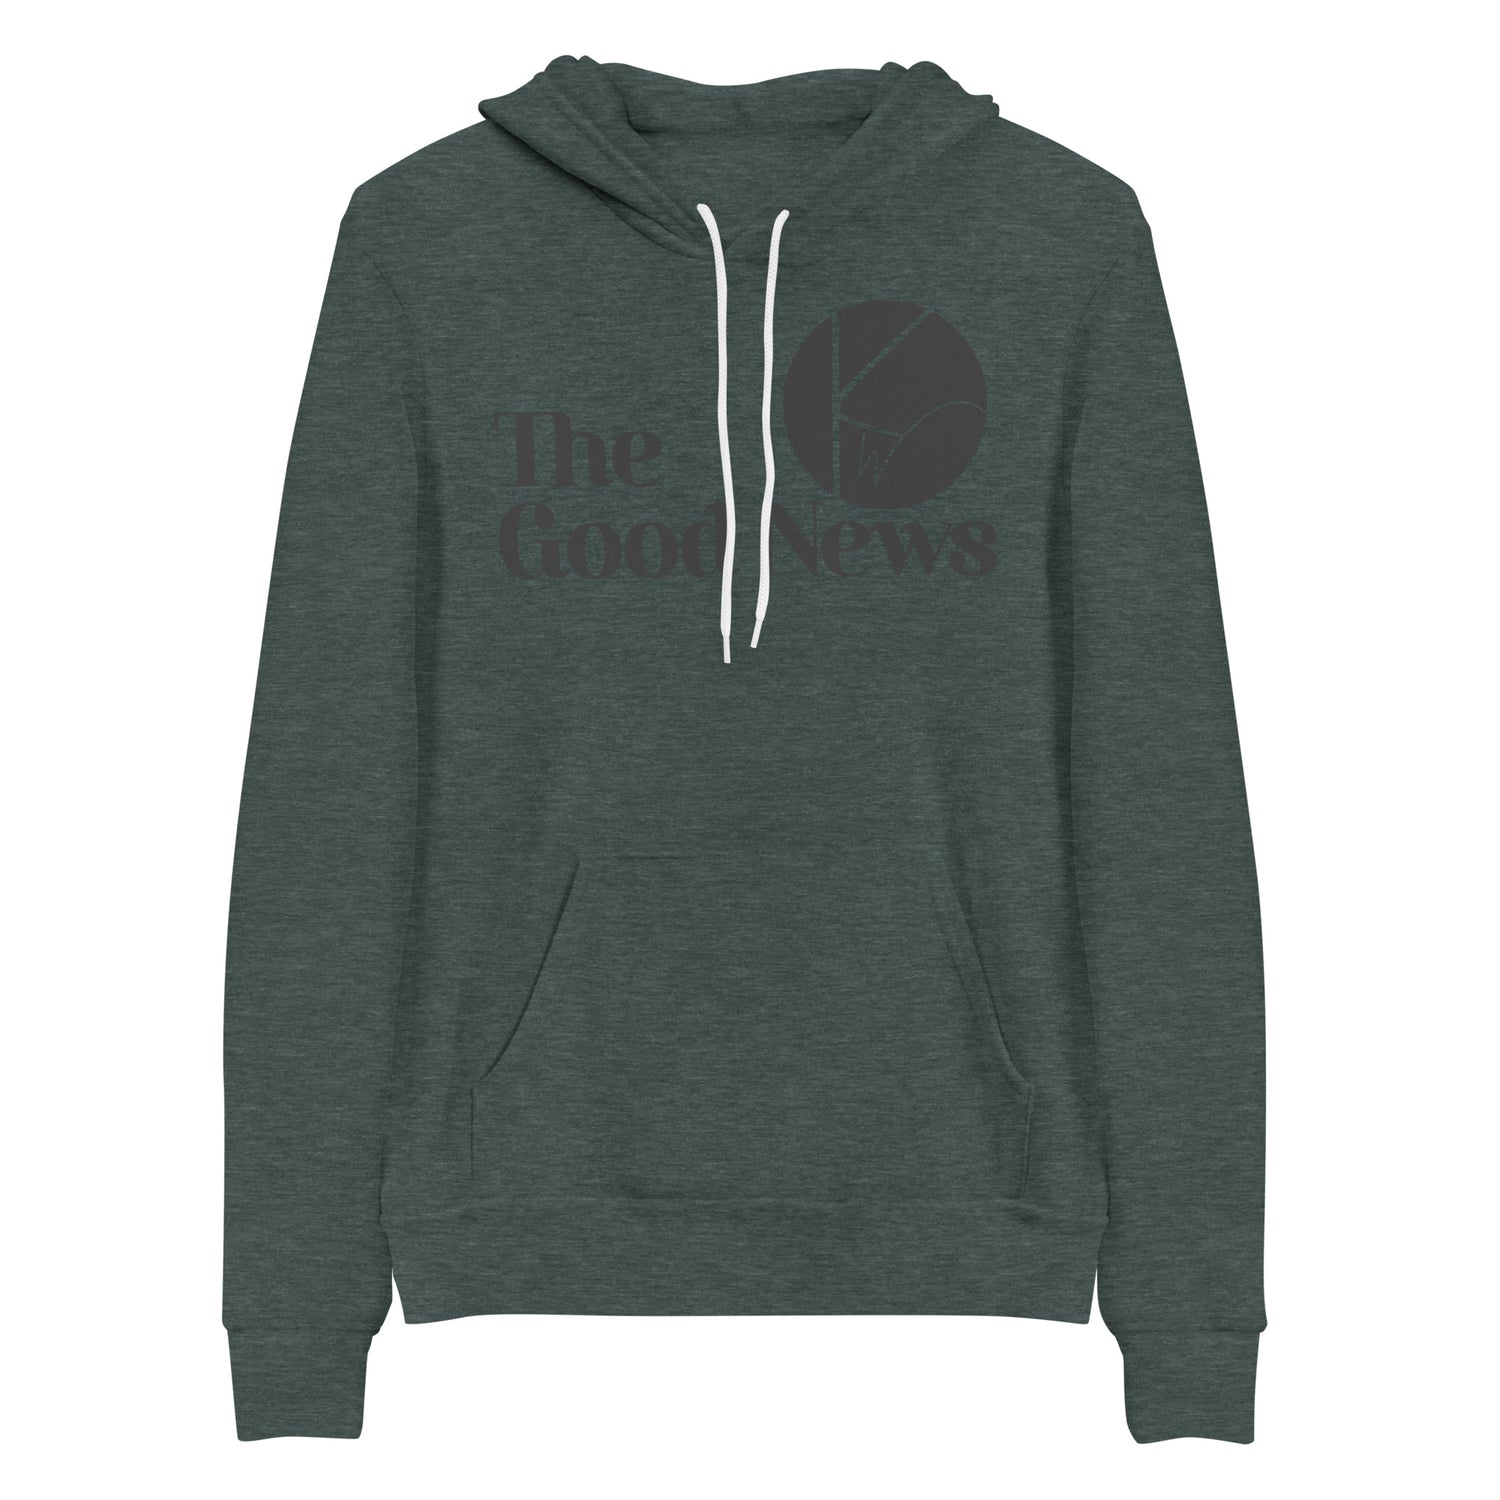 THE GOOD NEWS UNISEX FRONT AND BACK HOODIE